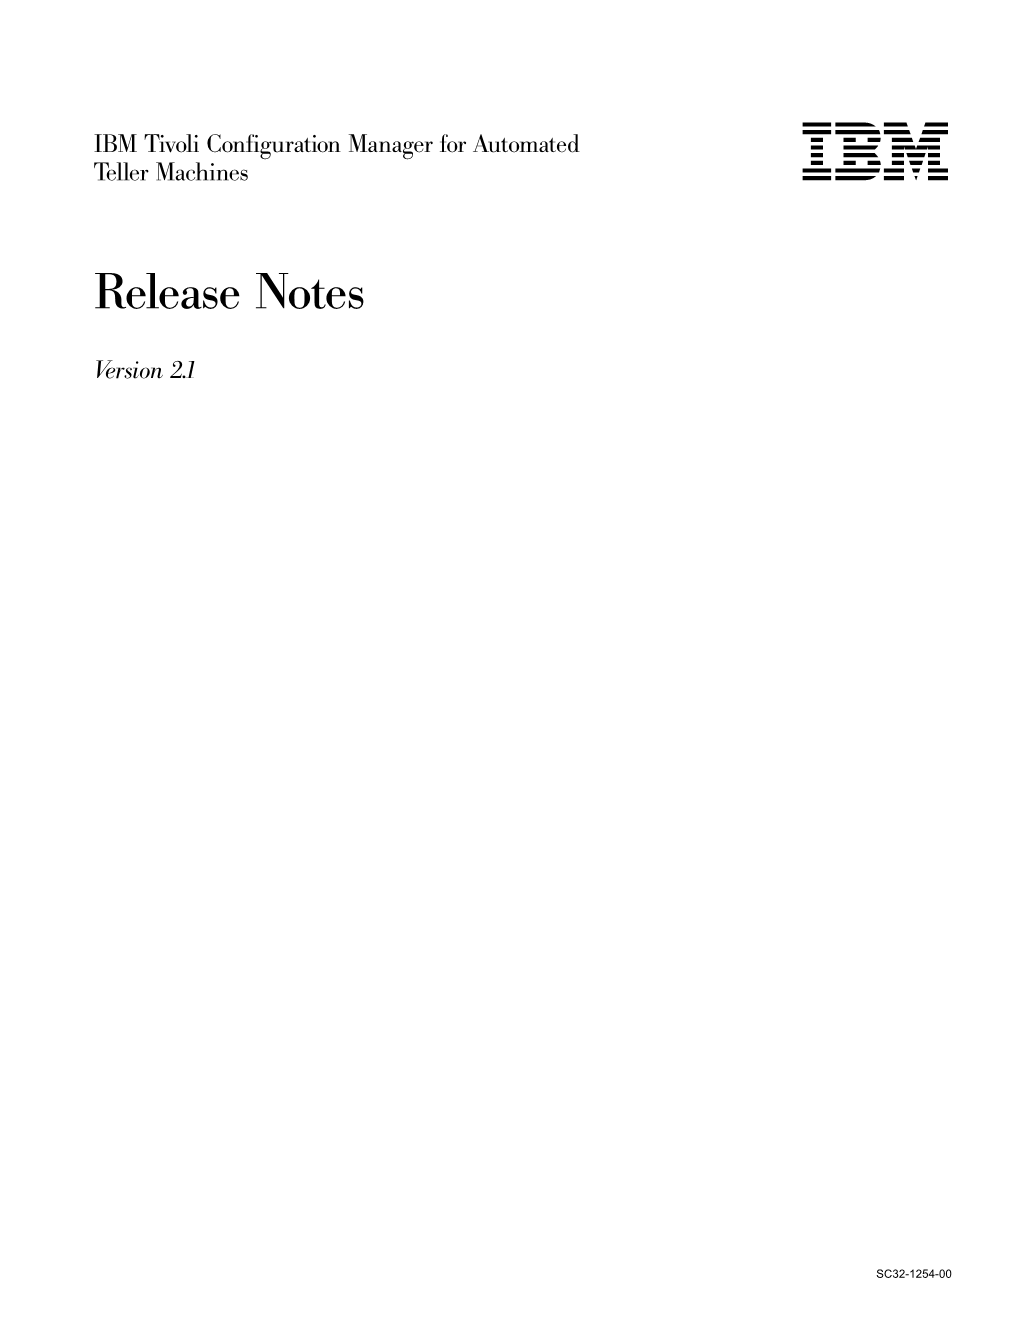 IBM Tivoli Configuration Manager for Automated Teller Machines: Release Notes Preface